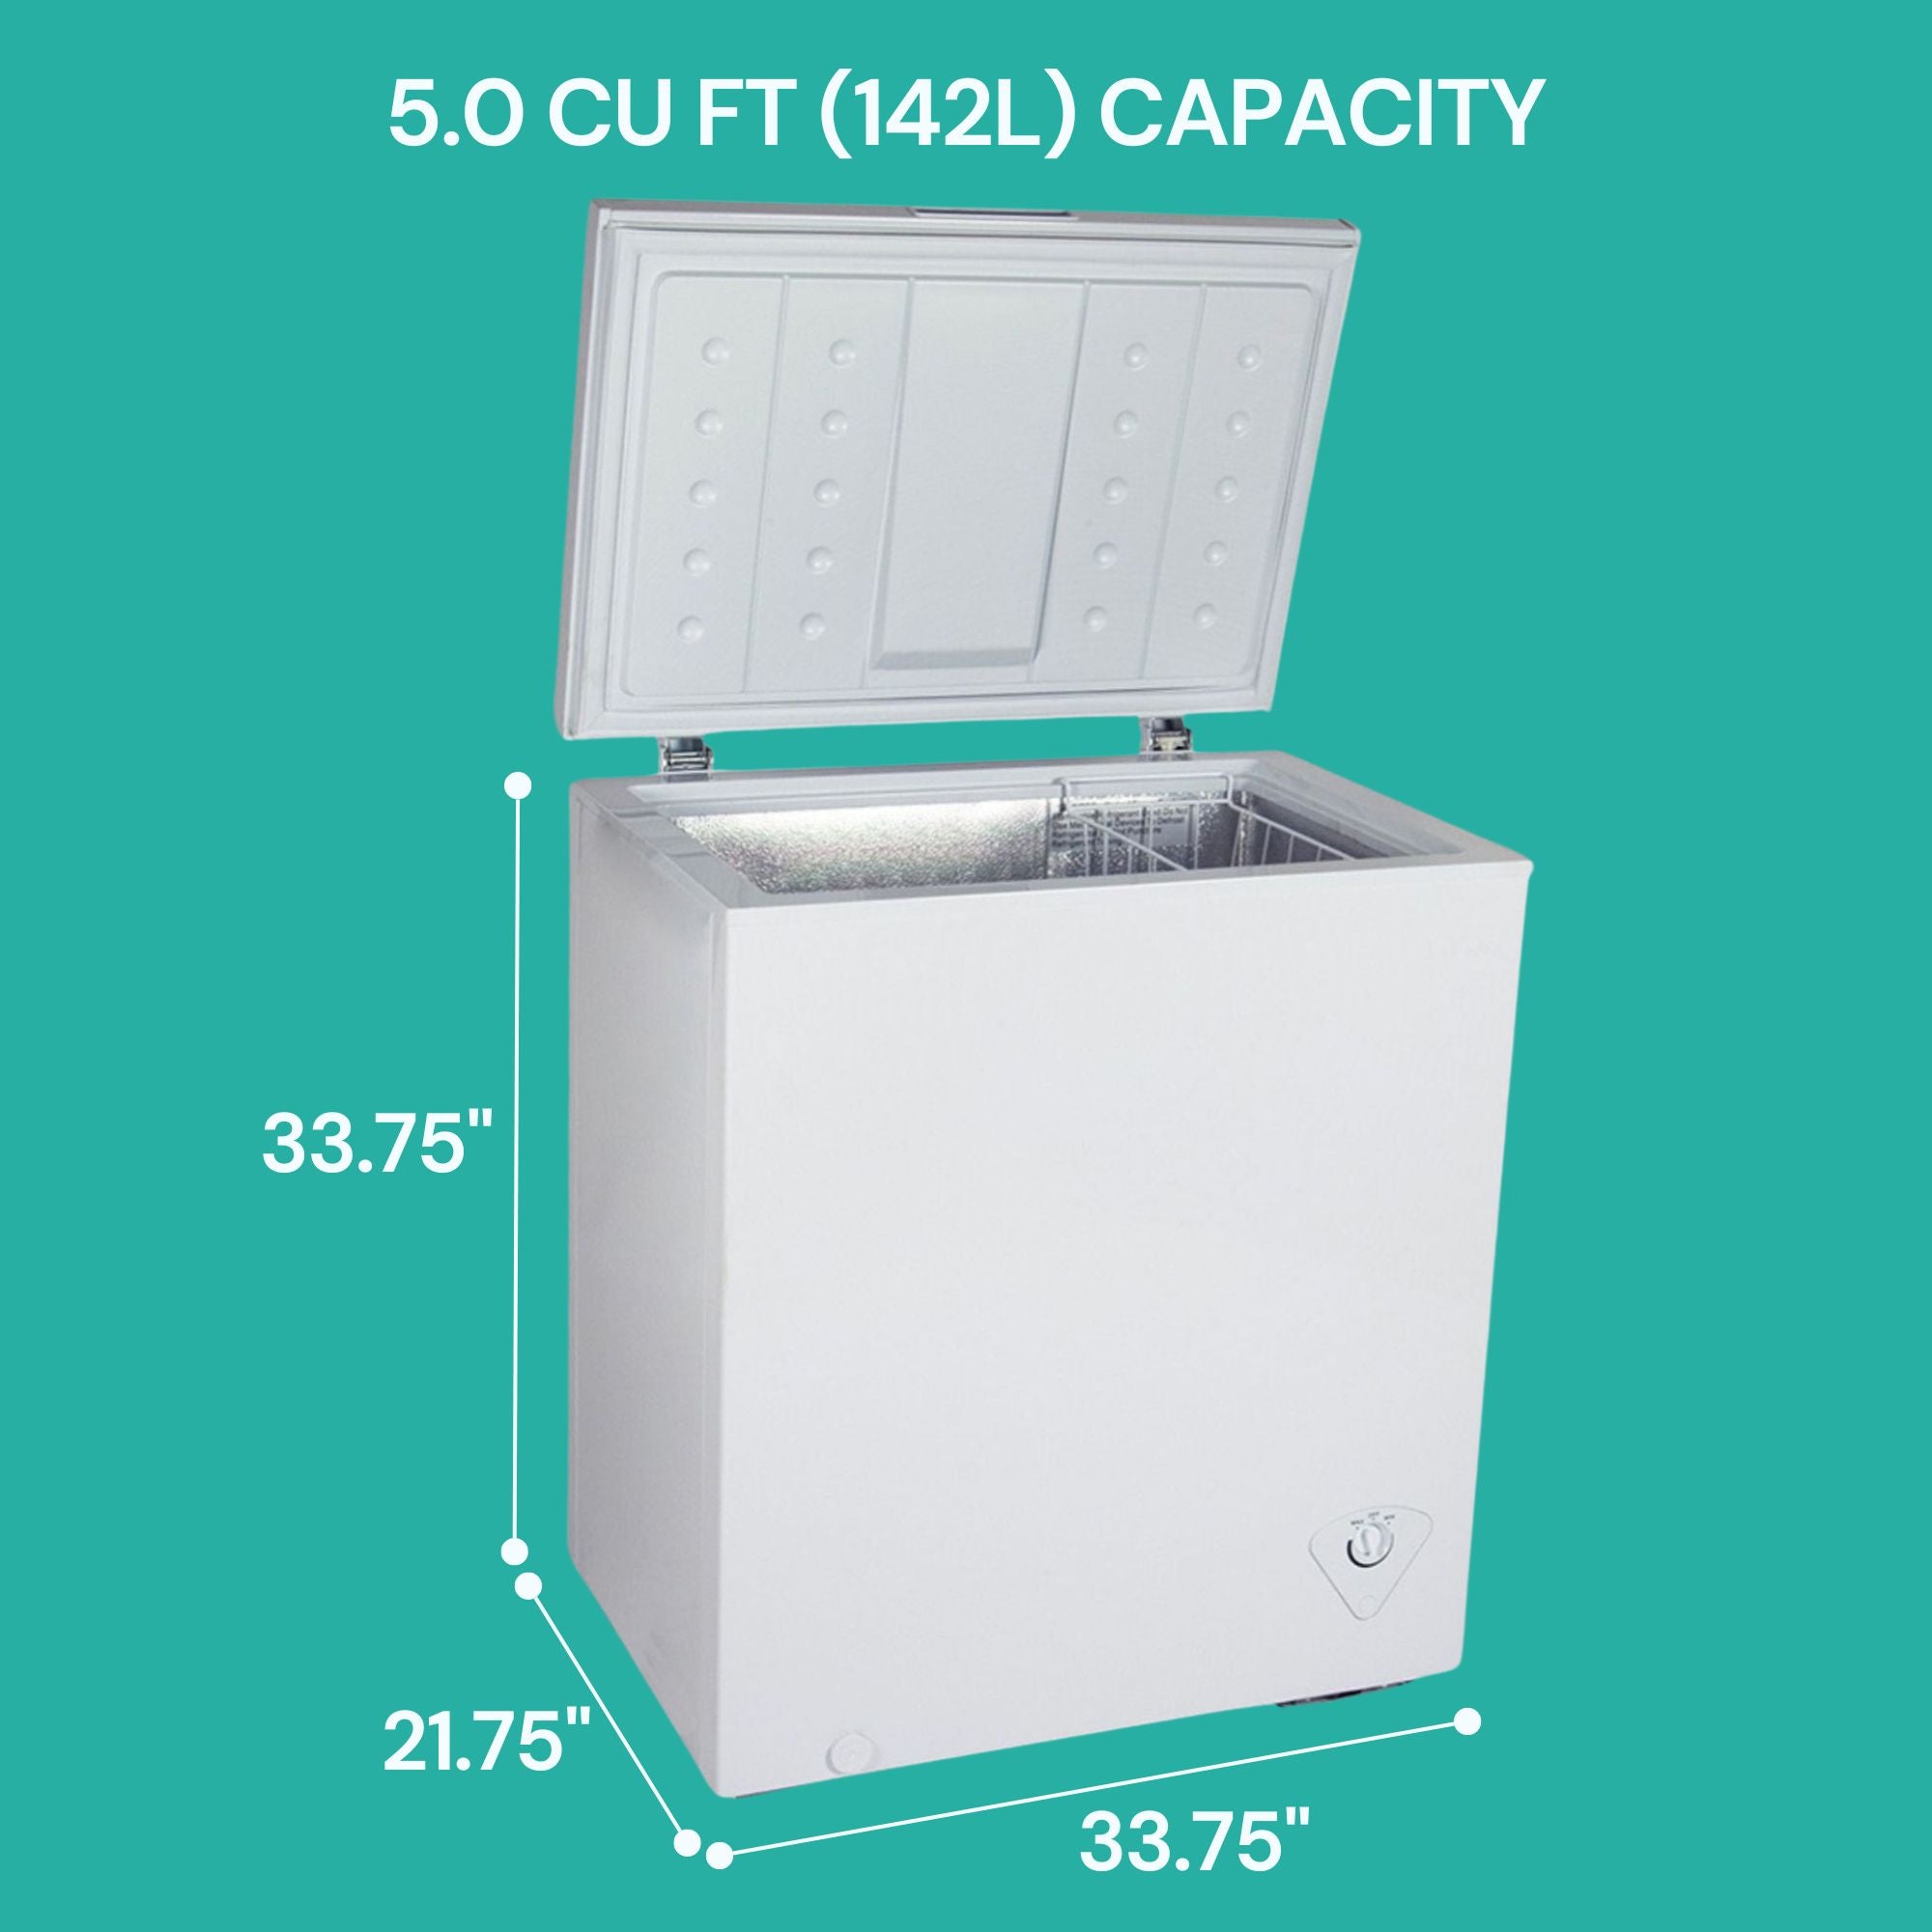 Product shot of white chest freezer with dimensions labeled on the left. Text to the right reads, "Net weight 75 lbs; Power 110V; Capacity 5.5 cu ft; Compressor cooling technology"